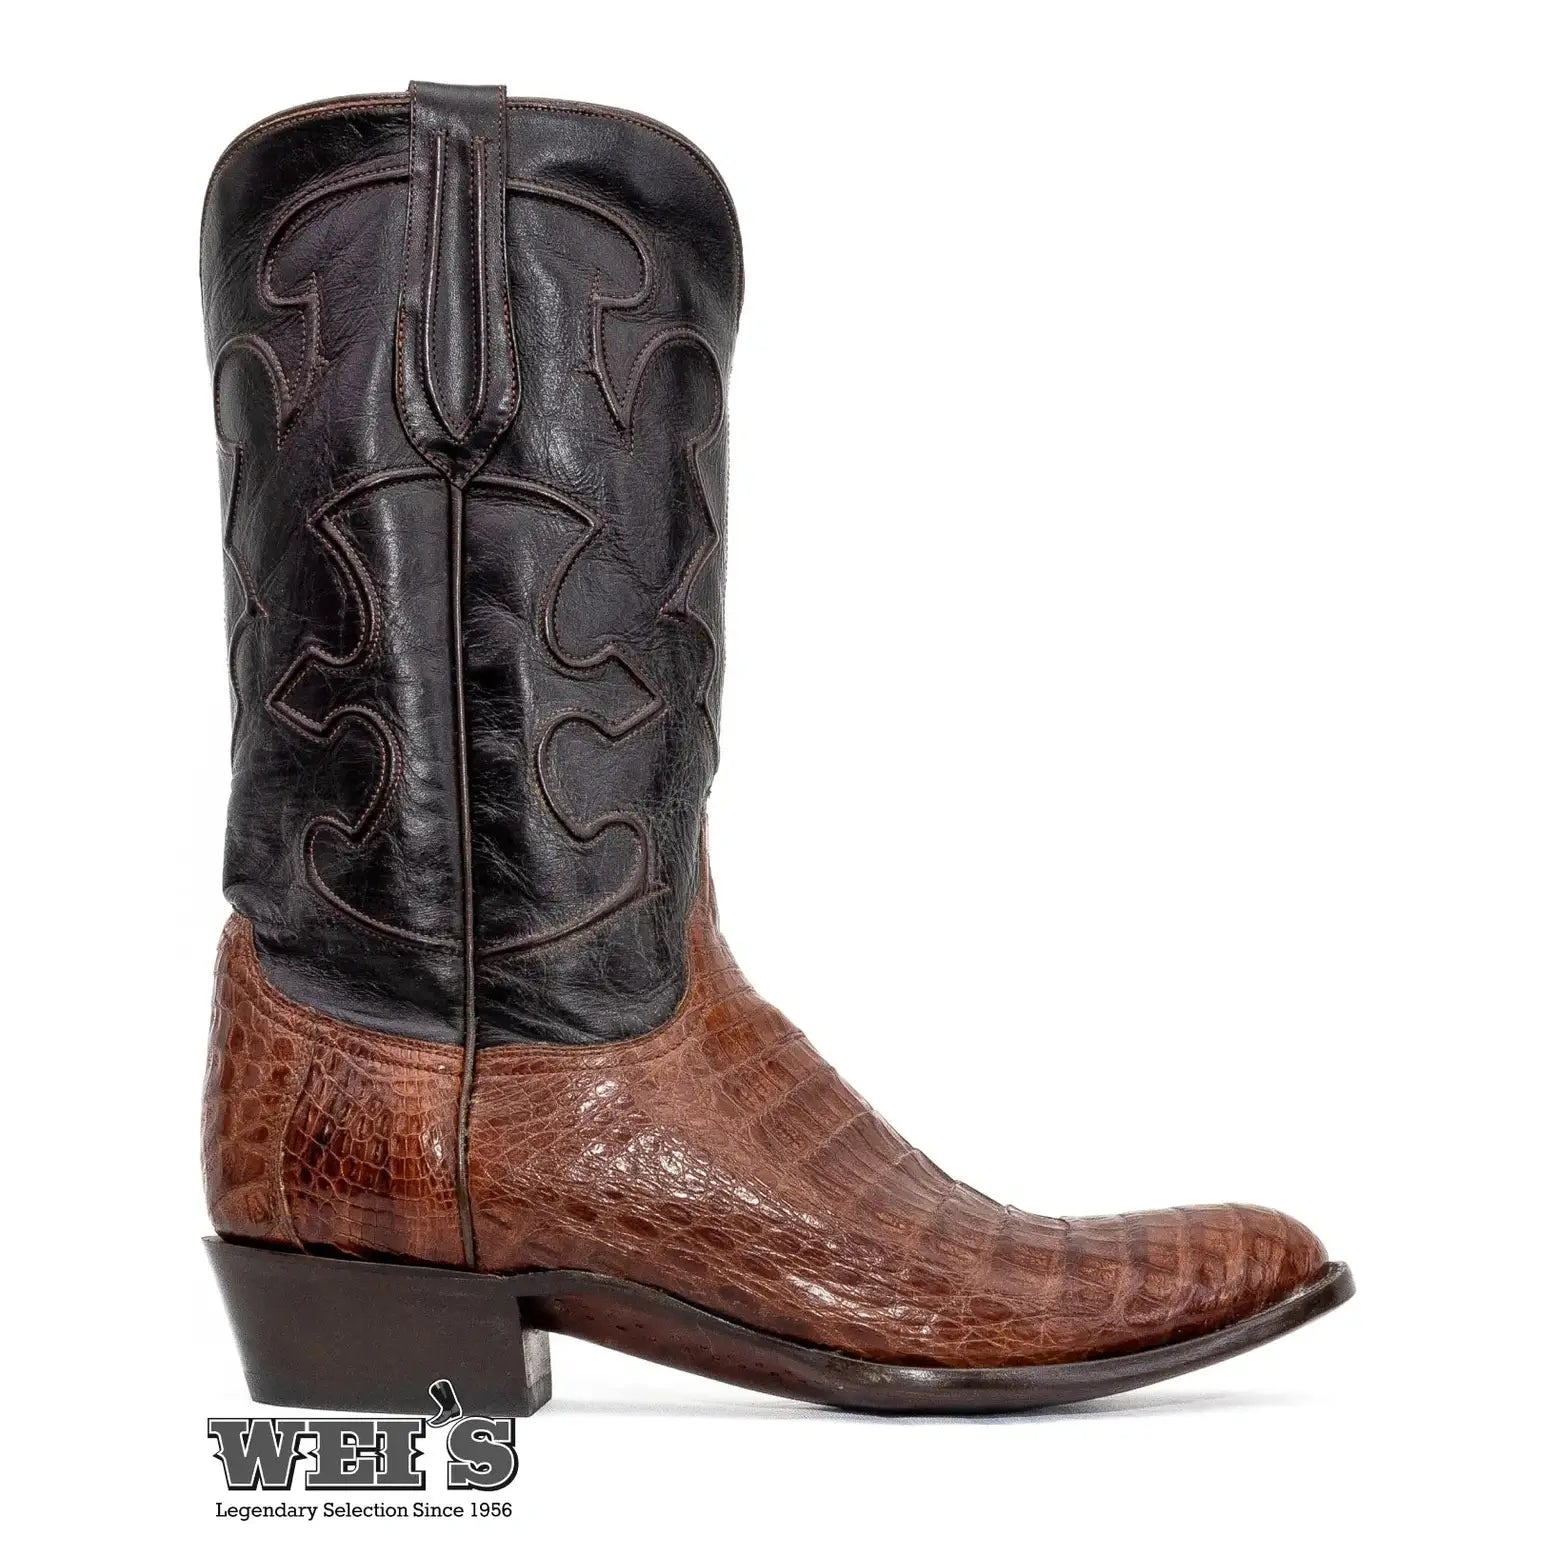 Lucchese Men's Cowboy Boots 15" Exotic Caiman / Derby M1635.R4 - Lucchese Boots